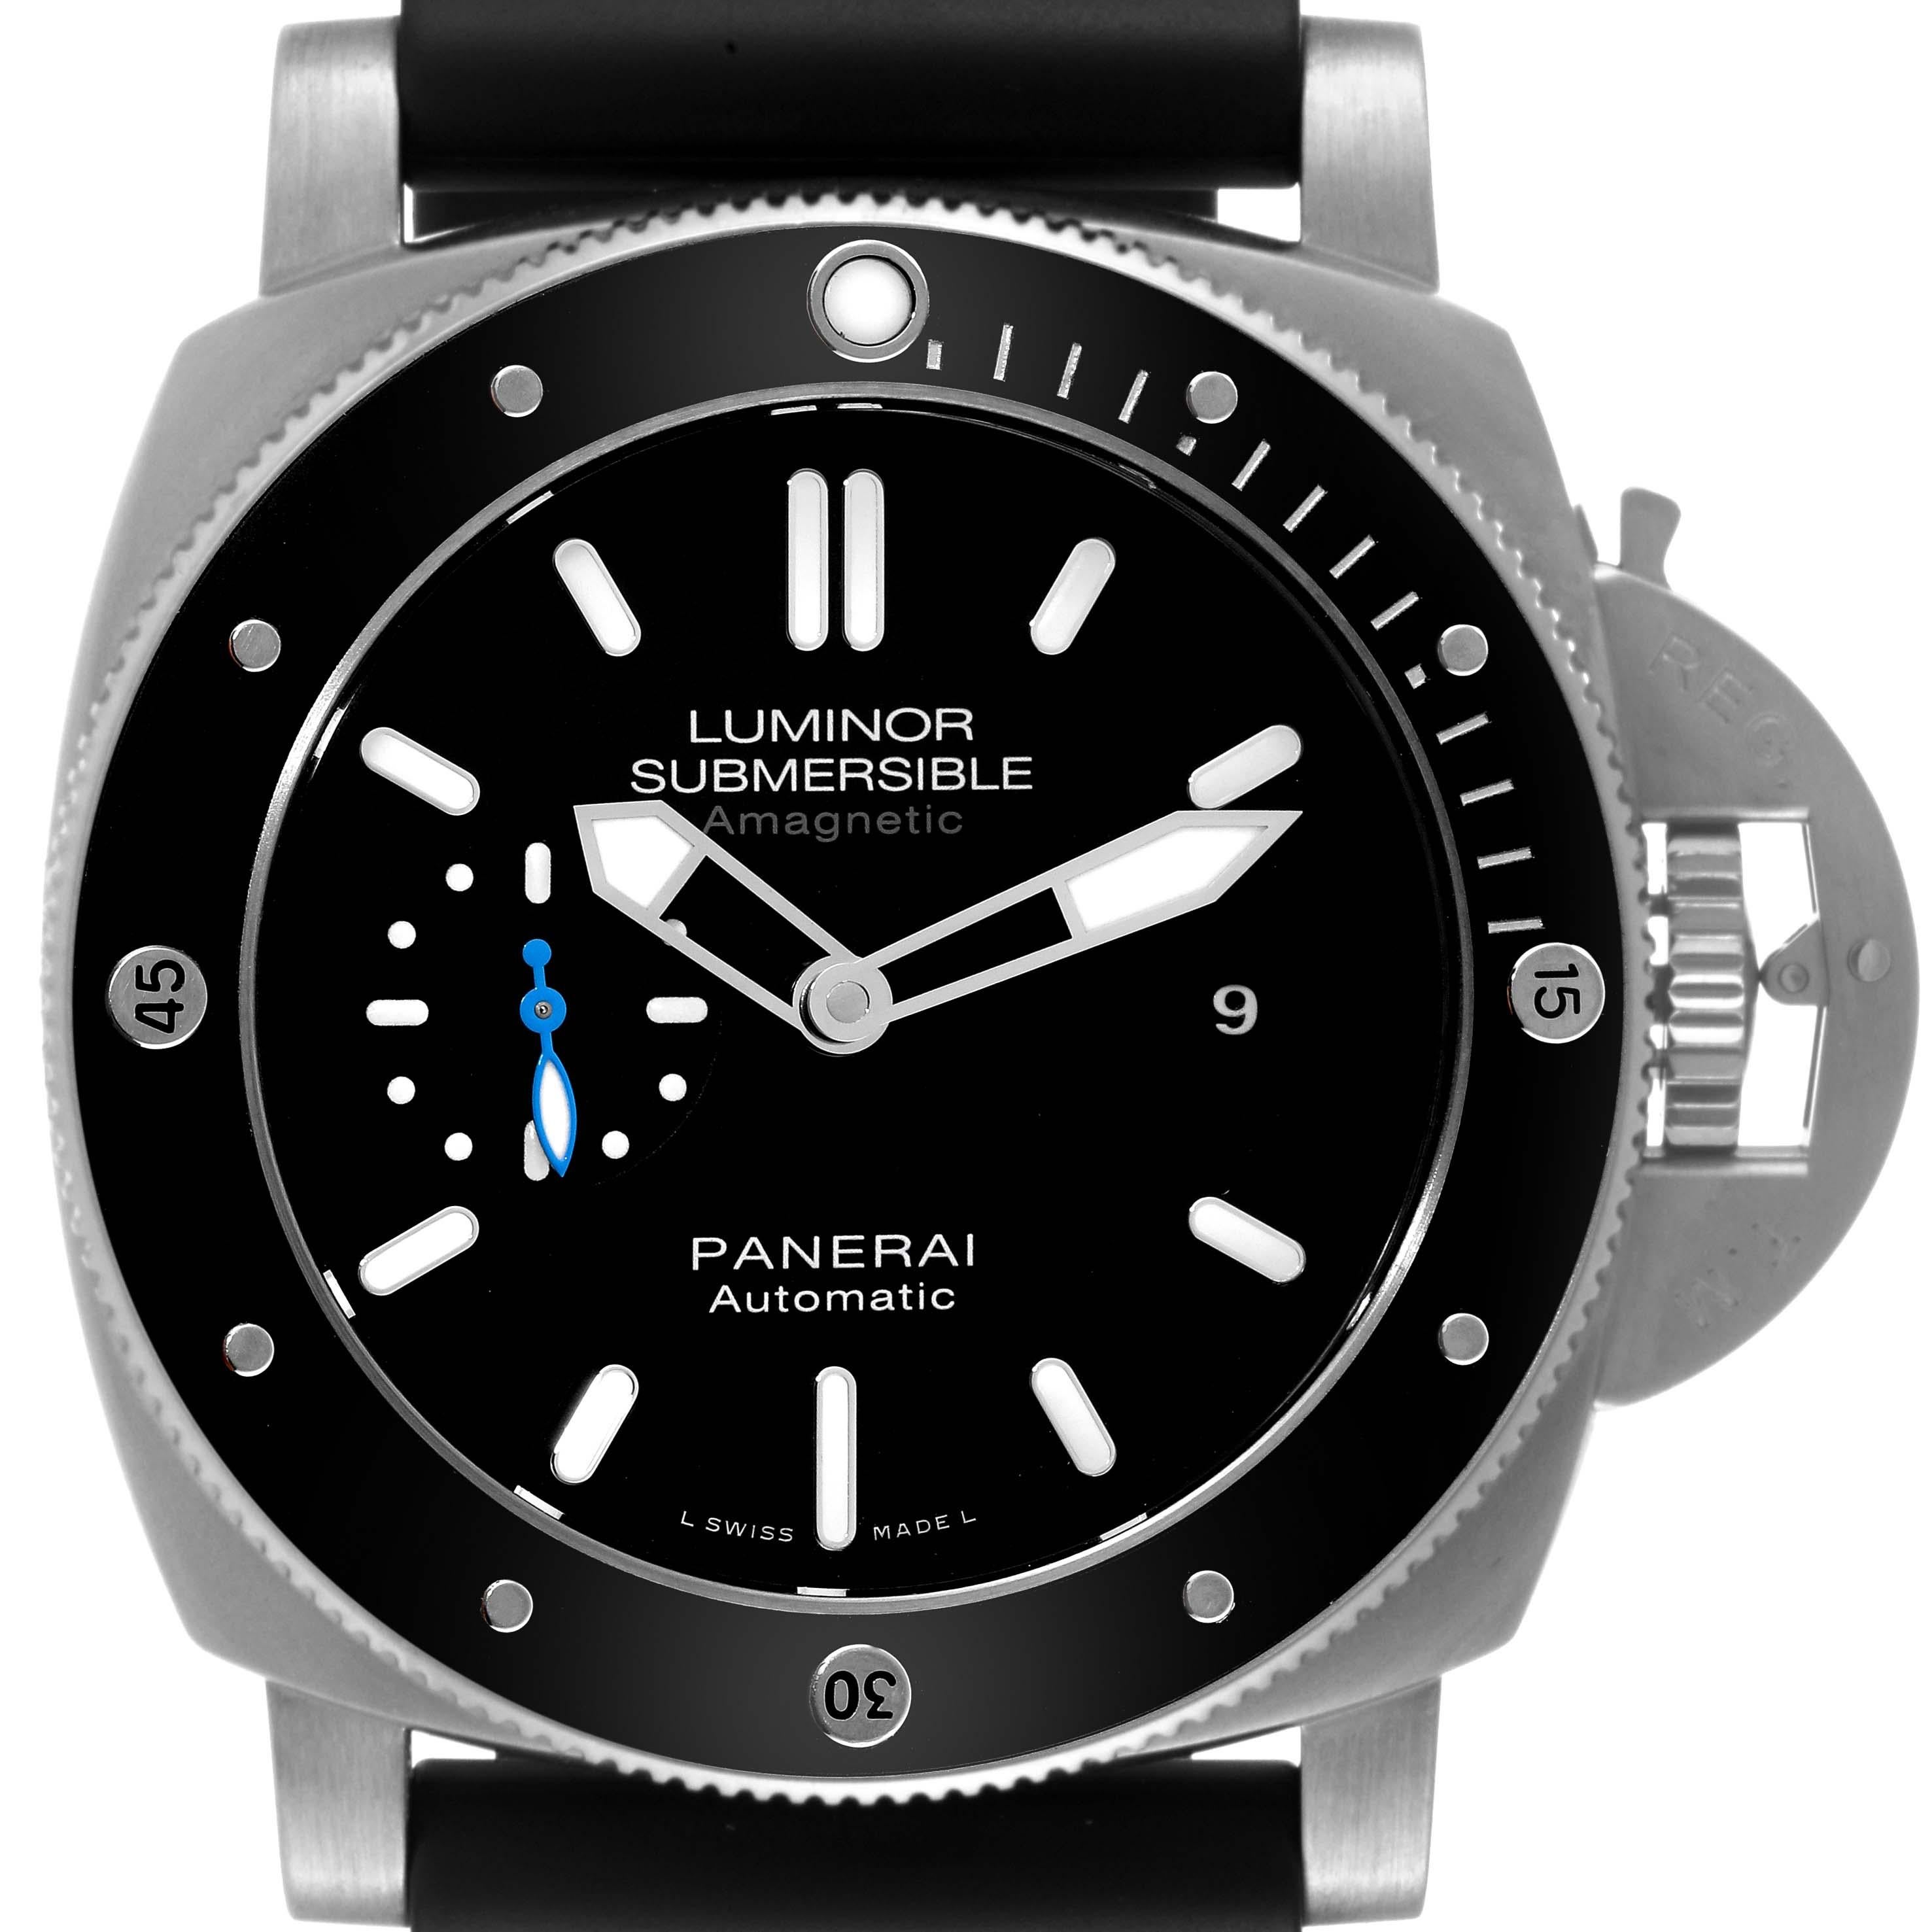 Panerai Luminor Submersible 1950 Amagnetic Mens Watch PAM01389 Box Papers For Sale